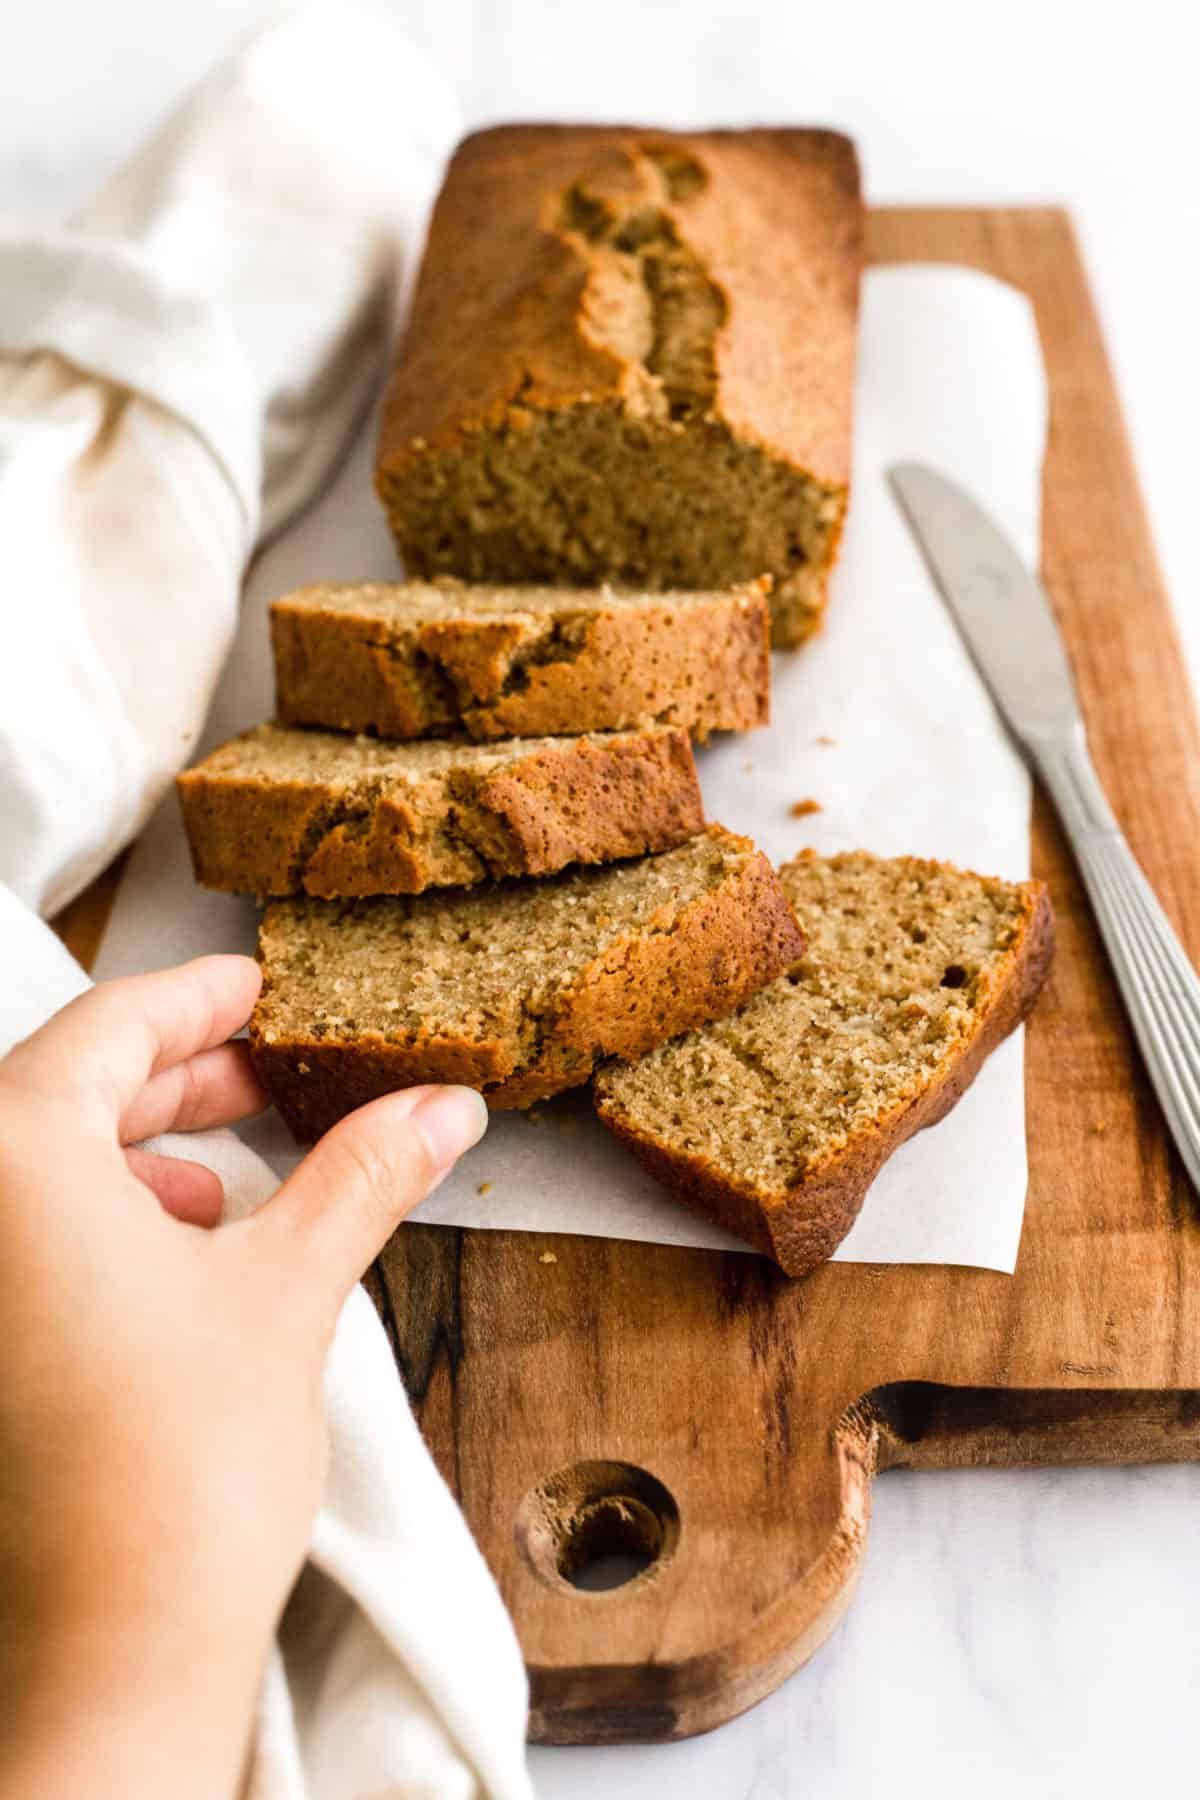 Hand reaching for a slice of gluten-free banana bread.